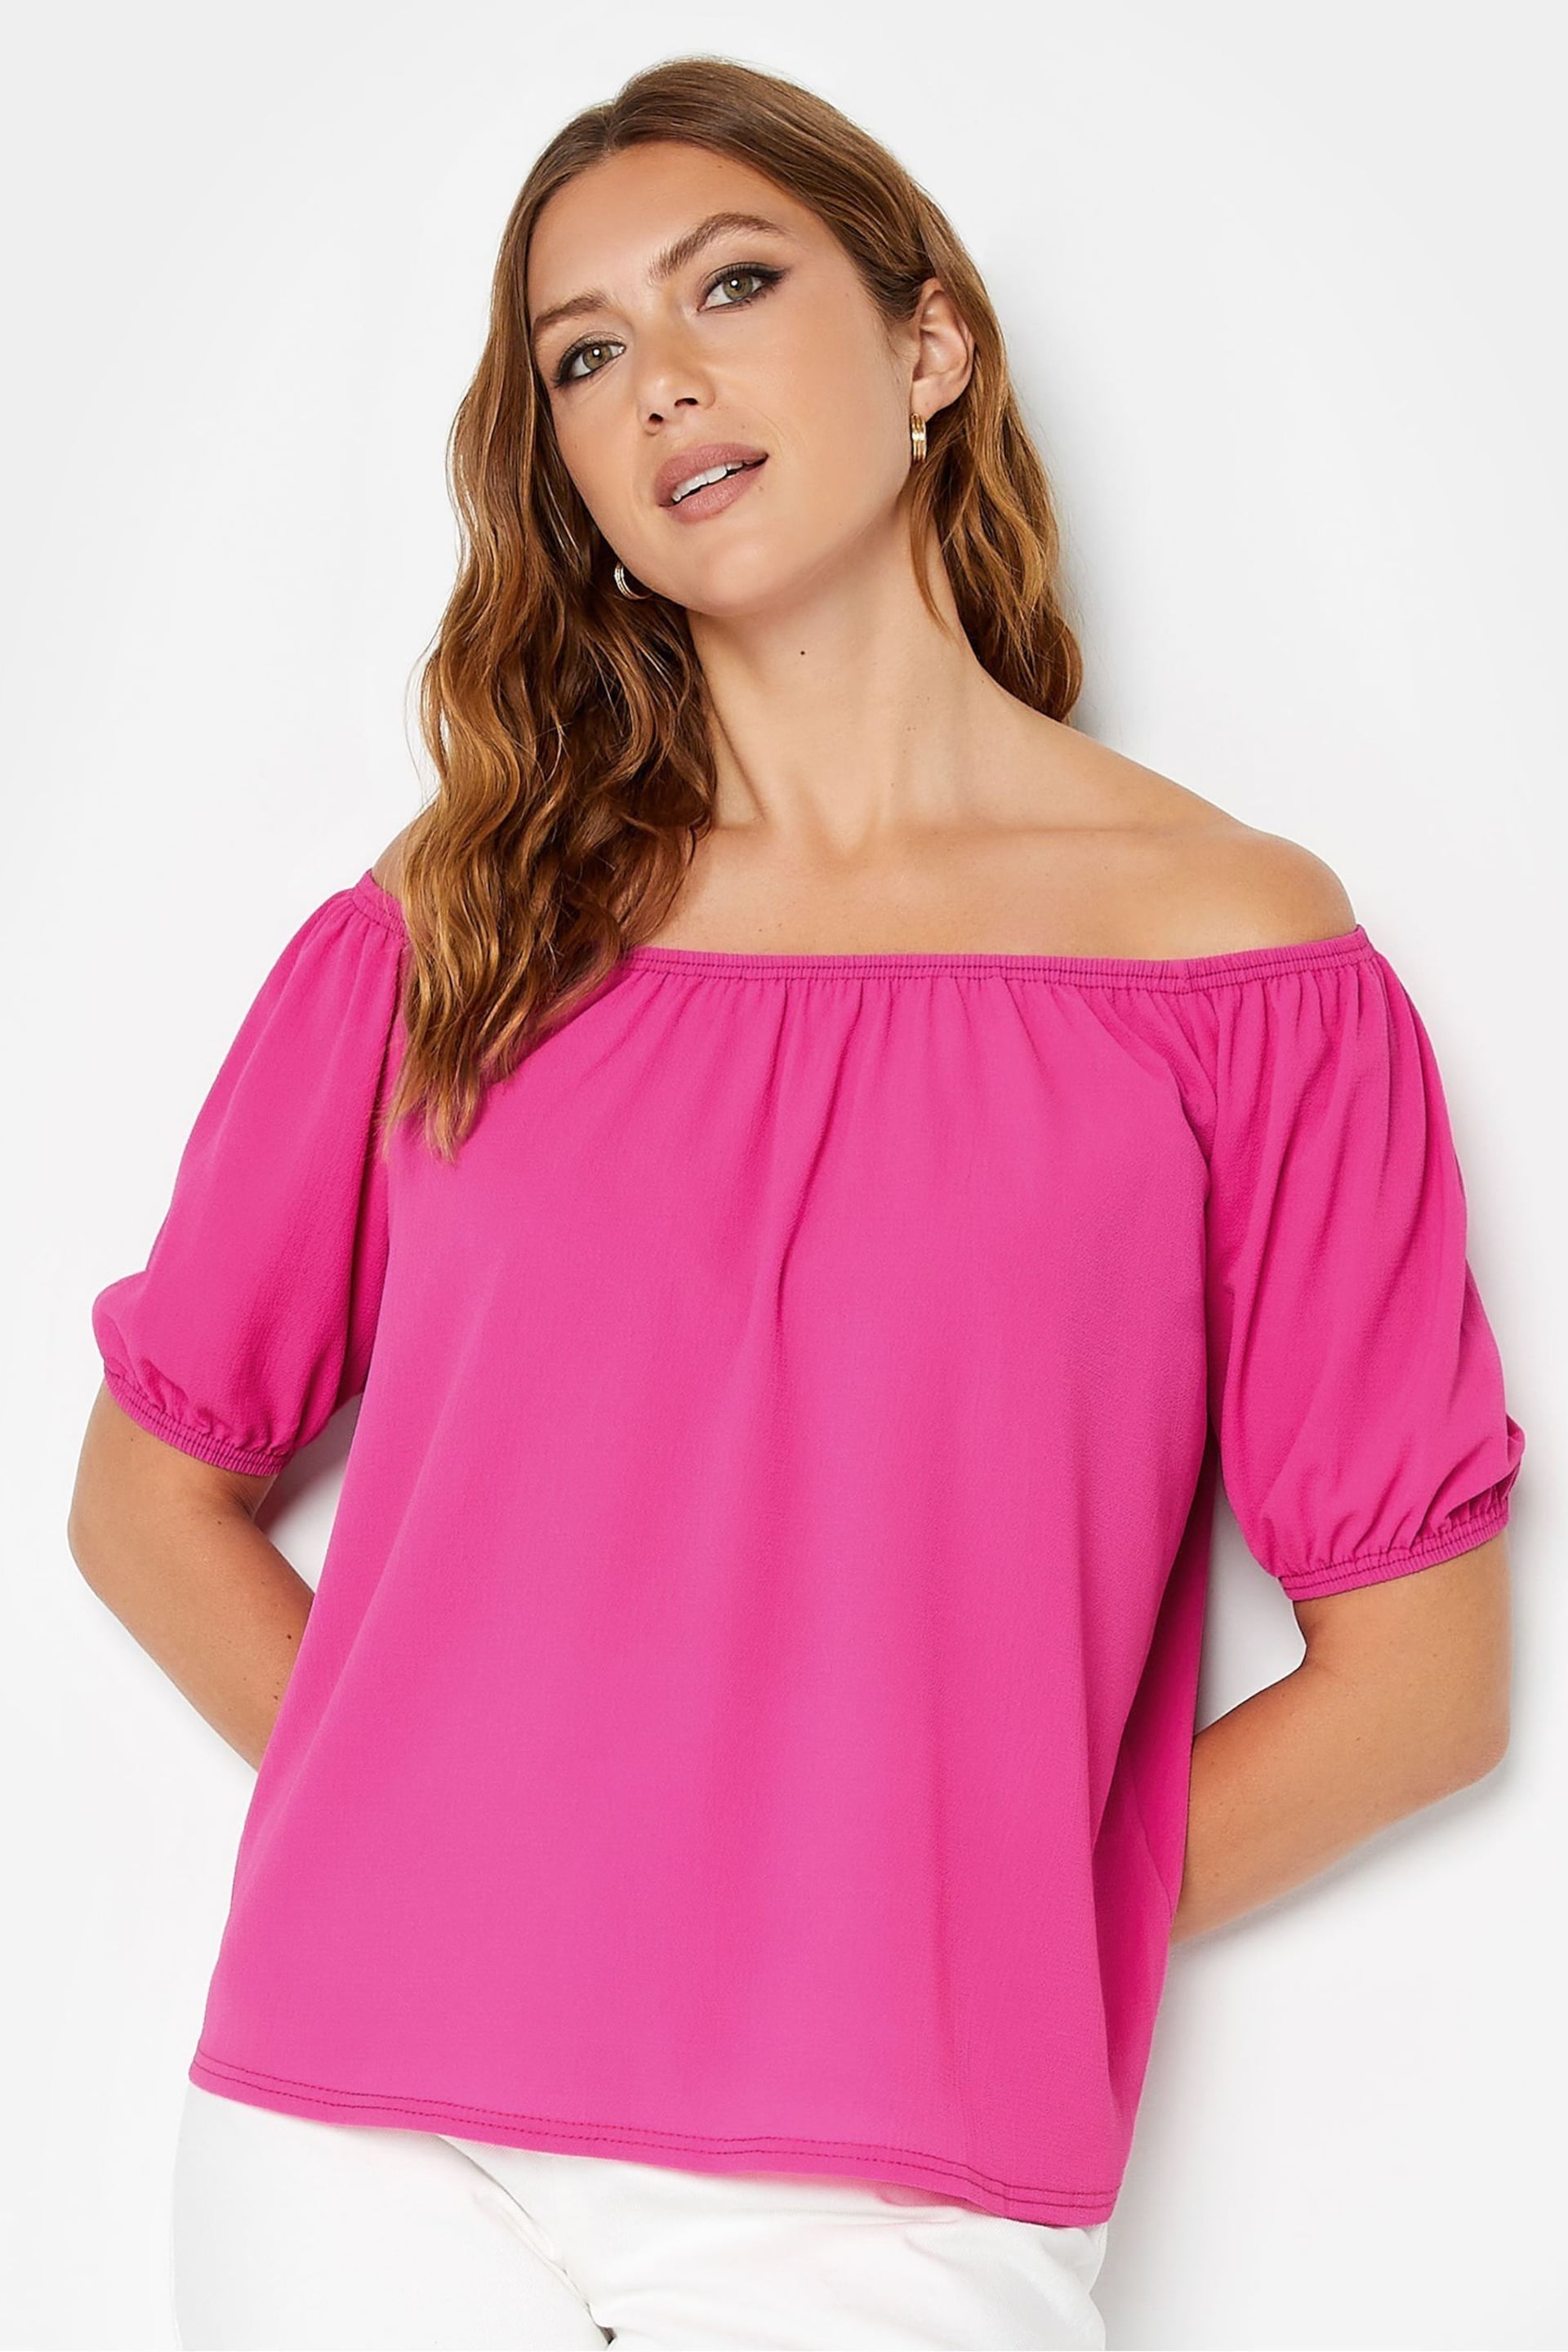 Long Tall Sally Pink Puff Sleeve Top - Image 1 of 4